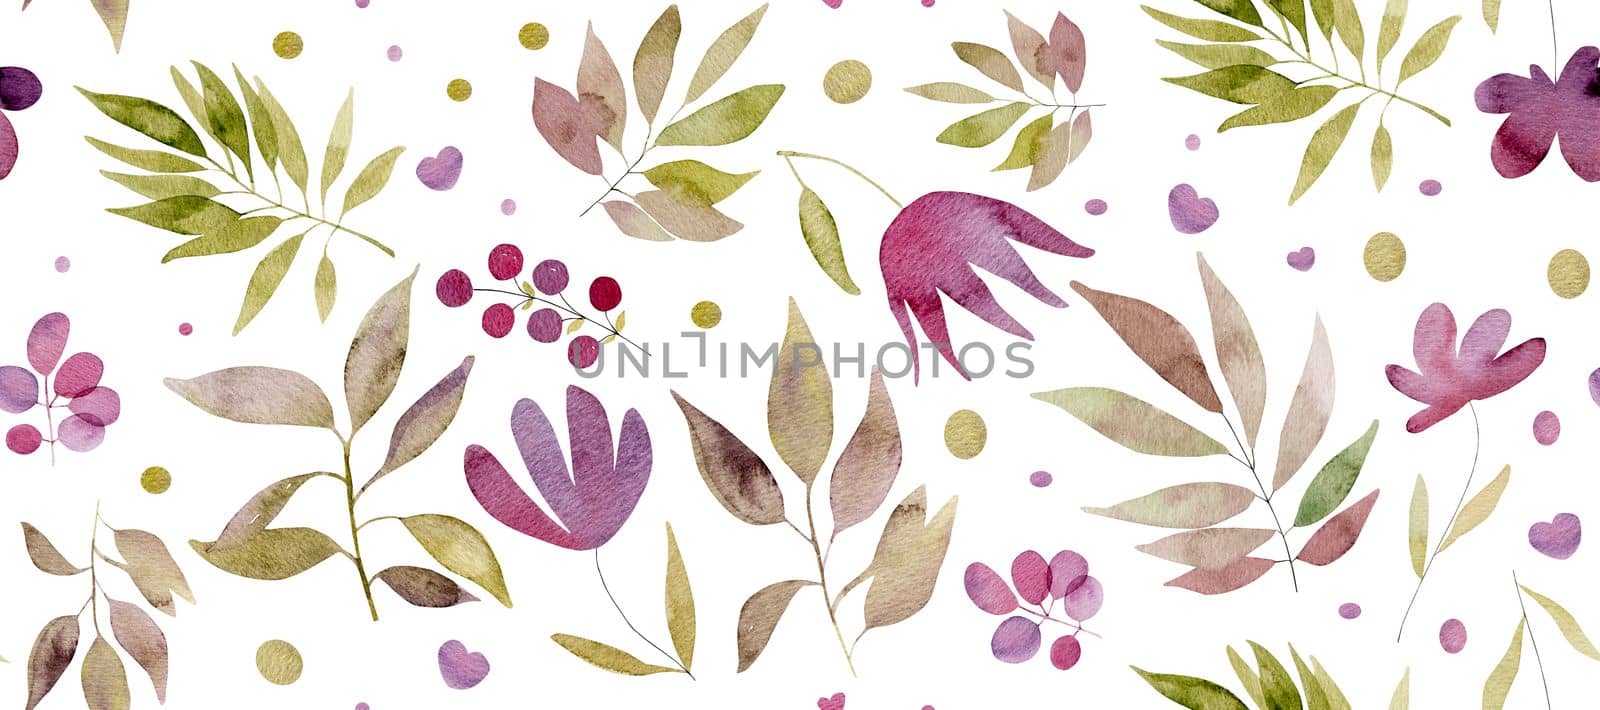 Watercolor botanical seamless pattern with flowers and plants. Aquarelle floral spring drawing for romantic and wedding postcards